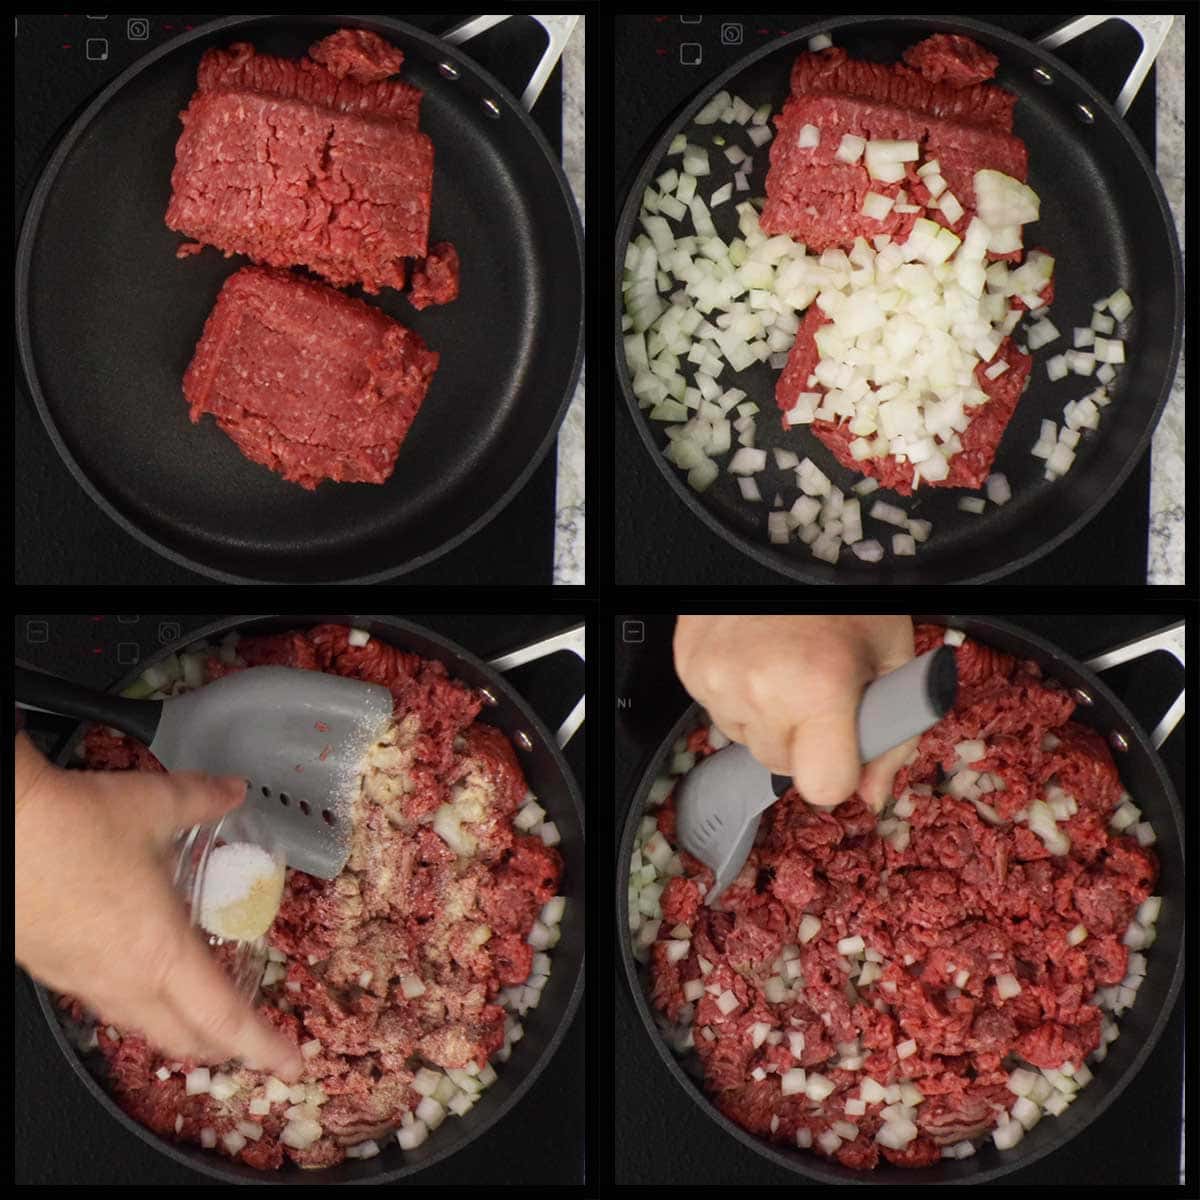 sauteing ground beef with onions and seasonings.